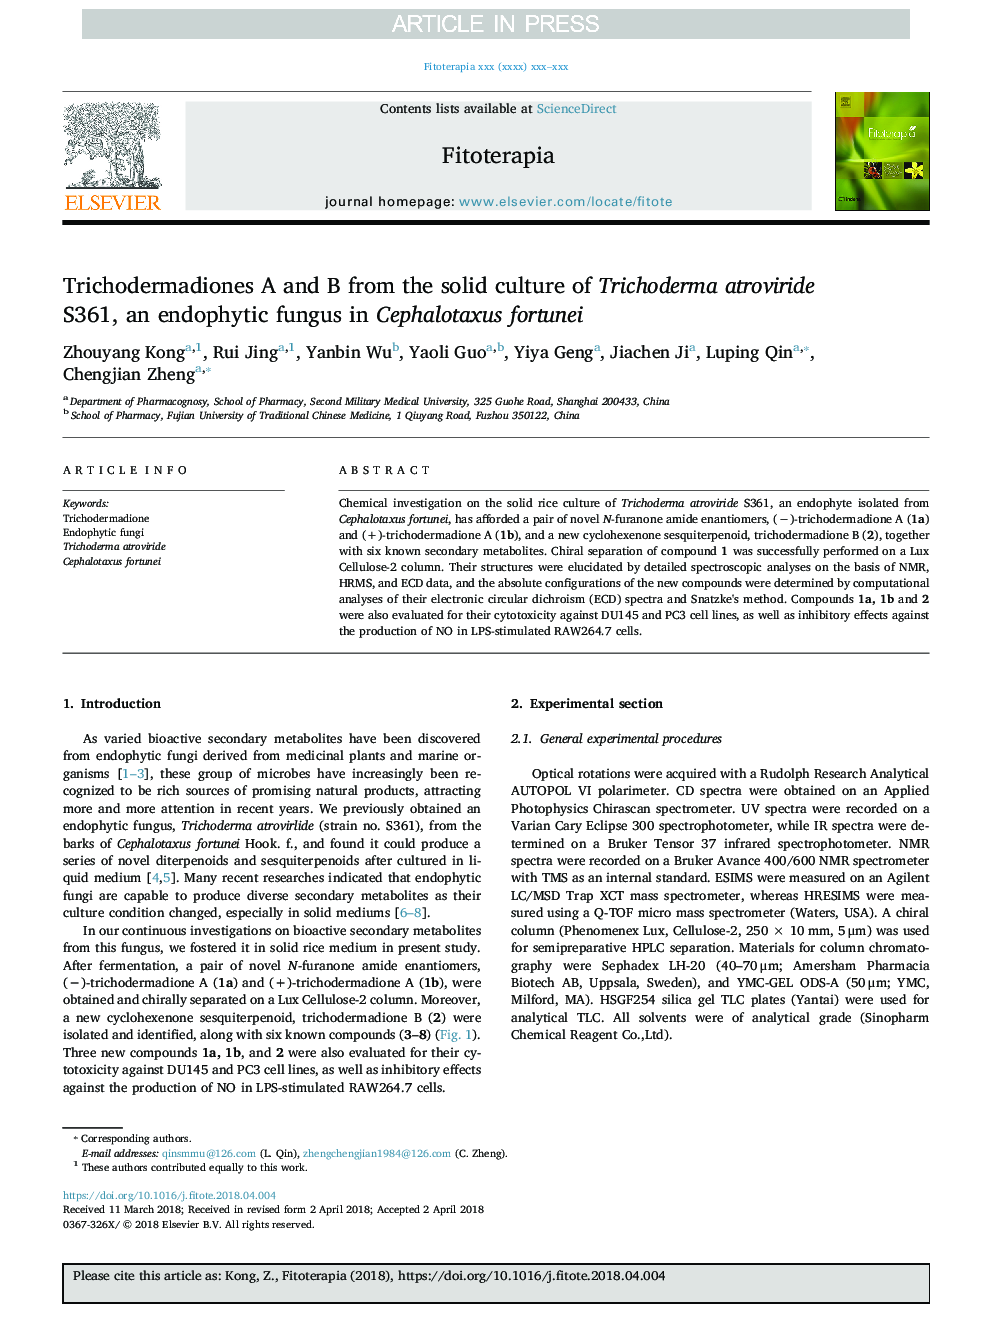 Trichodermadiones A and B from the solid culture of Trichoderma atroviride S361, an endophytic fungus in Cephalotaxus fortunei